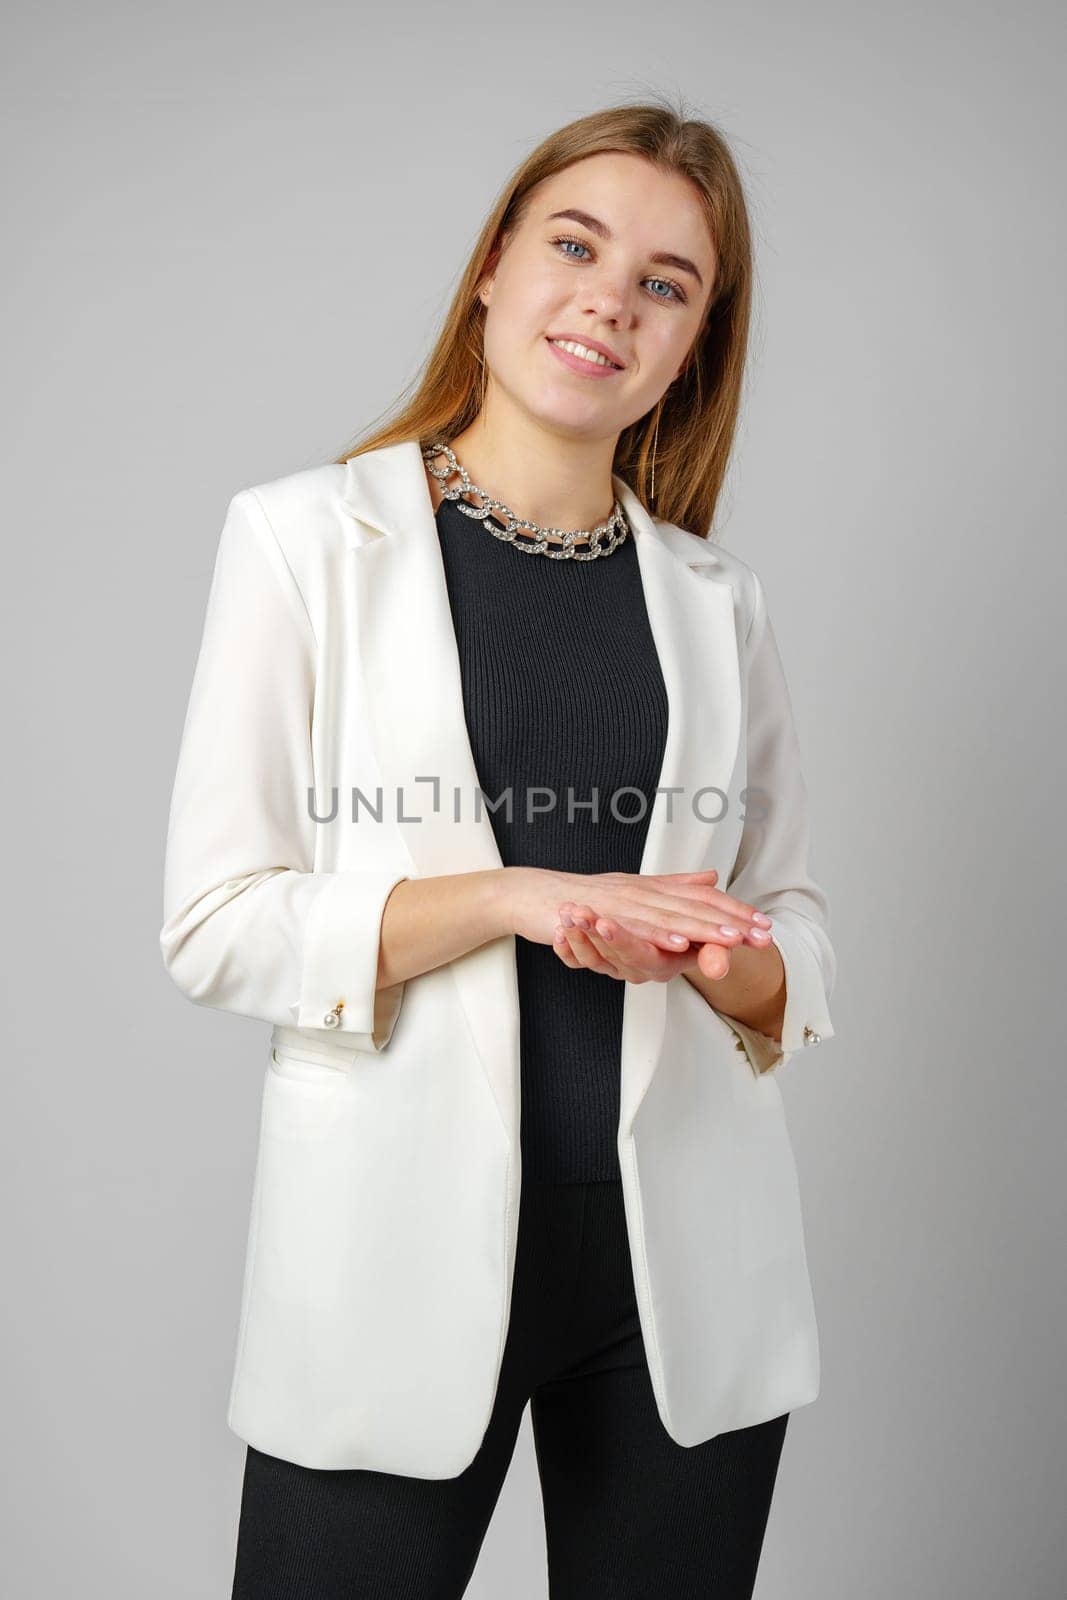 Woman in Black Top and White Jacket Posing in Studio by Fabrikasimf